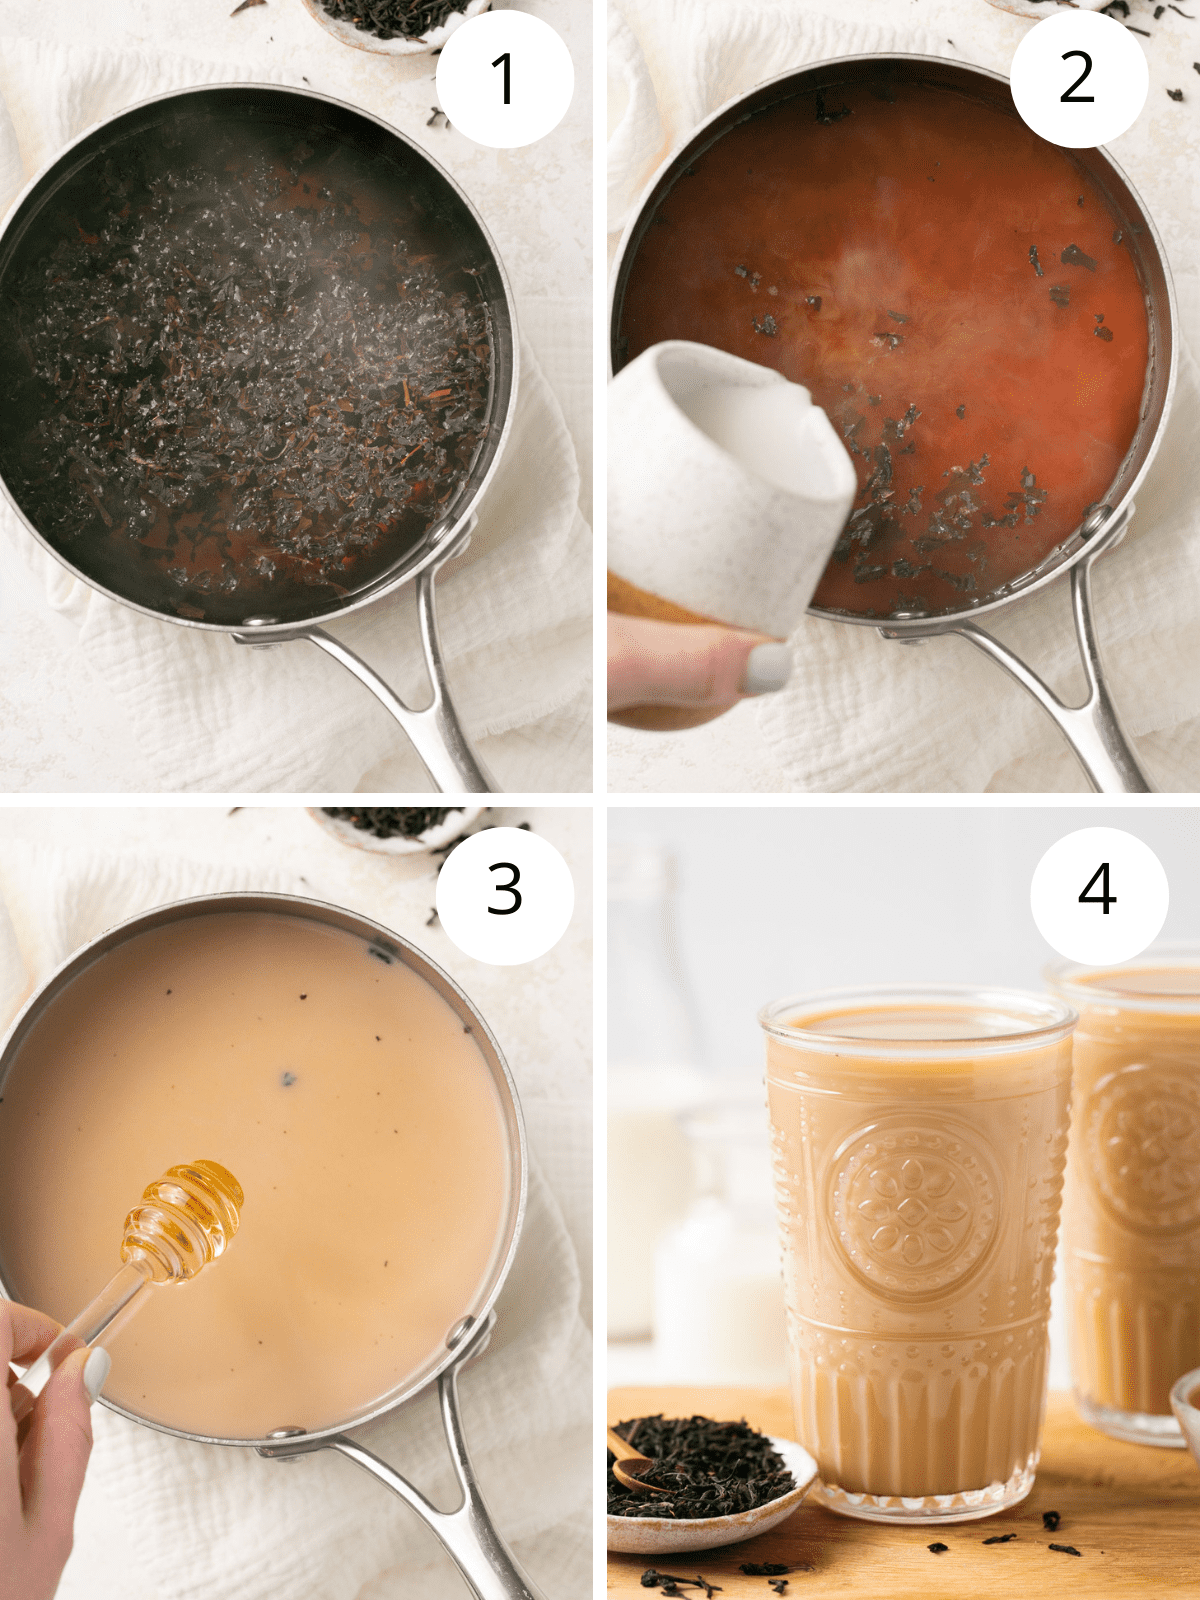 Step by step directions for making a Hokkaido milk tea drink.